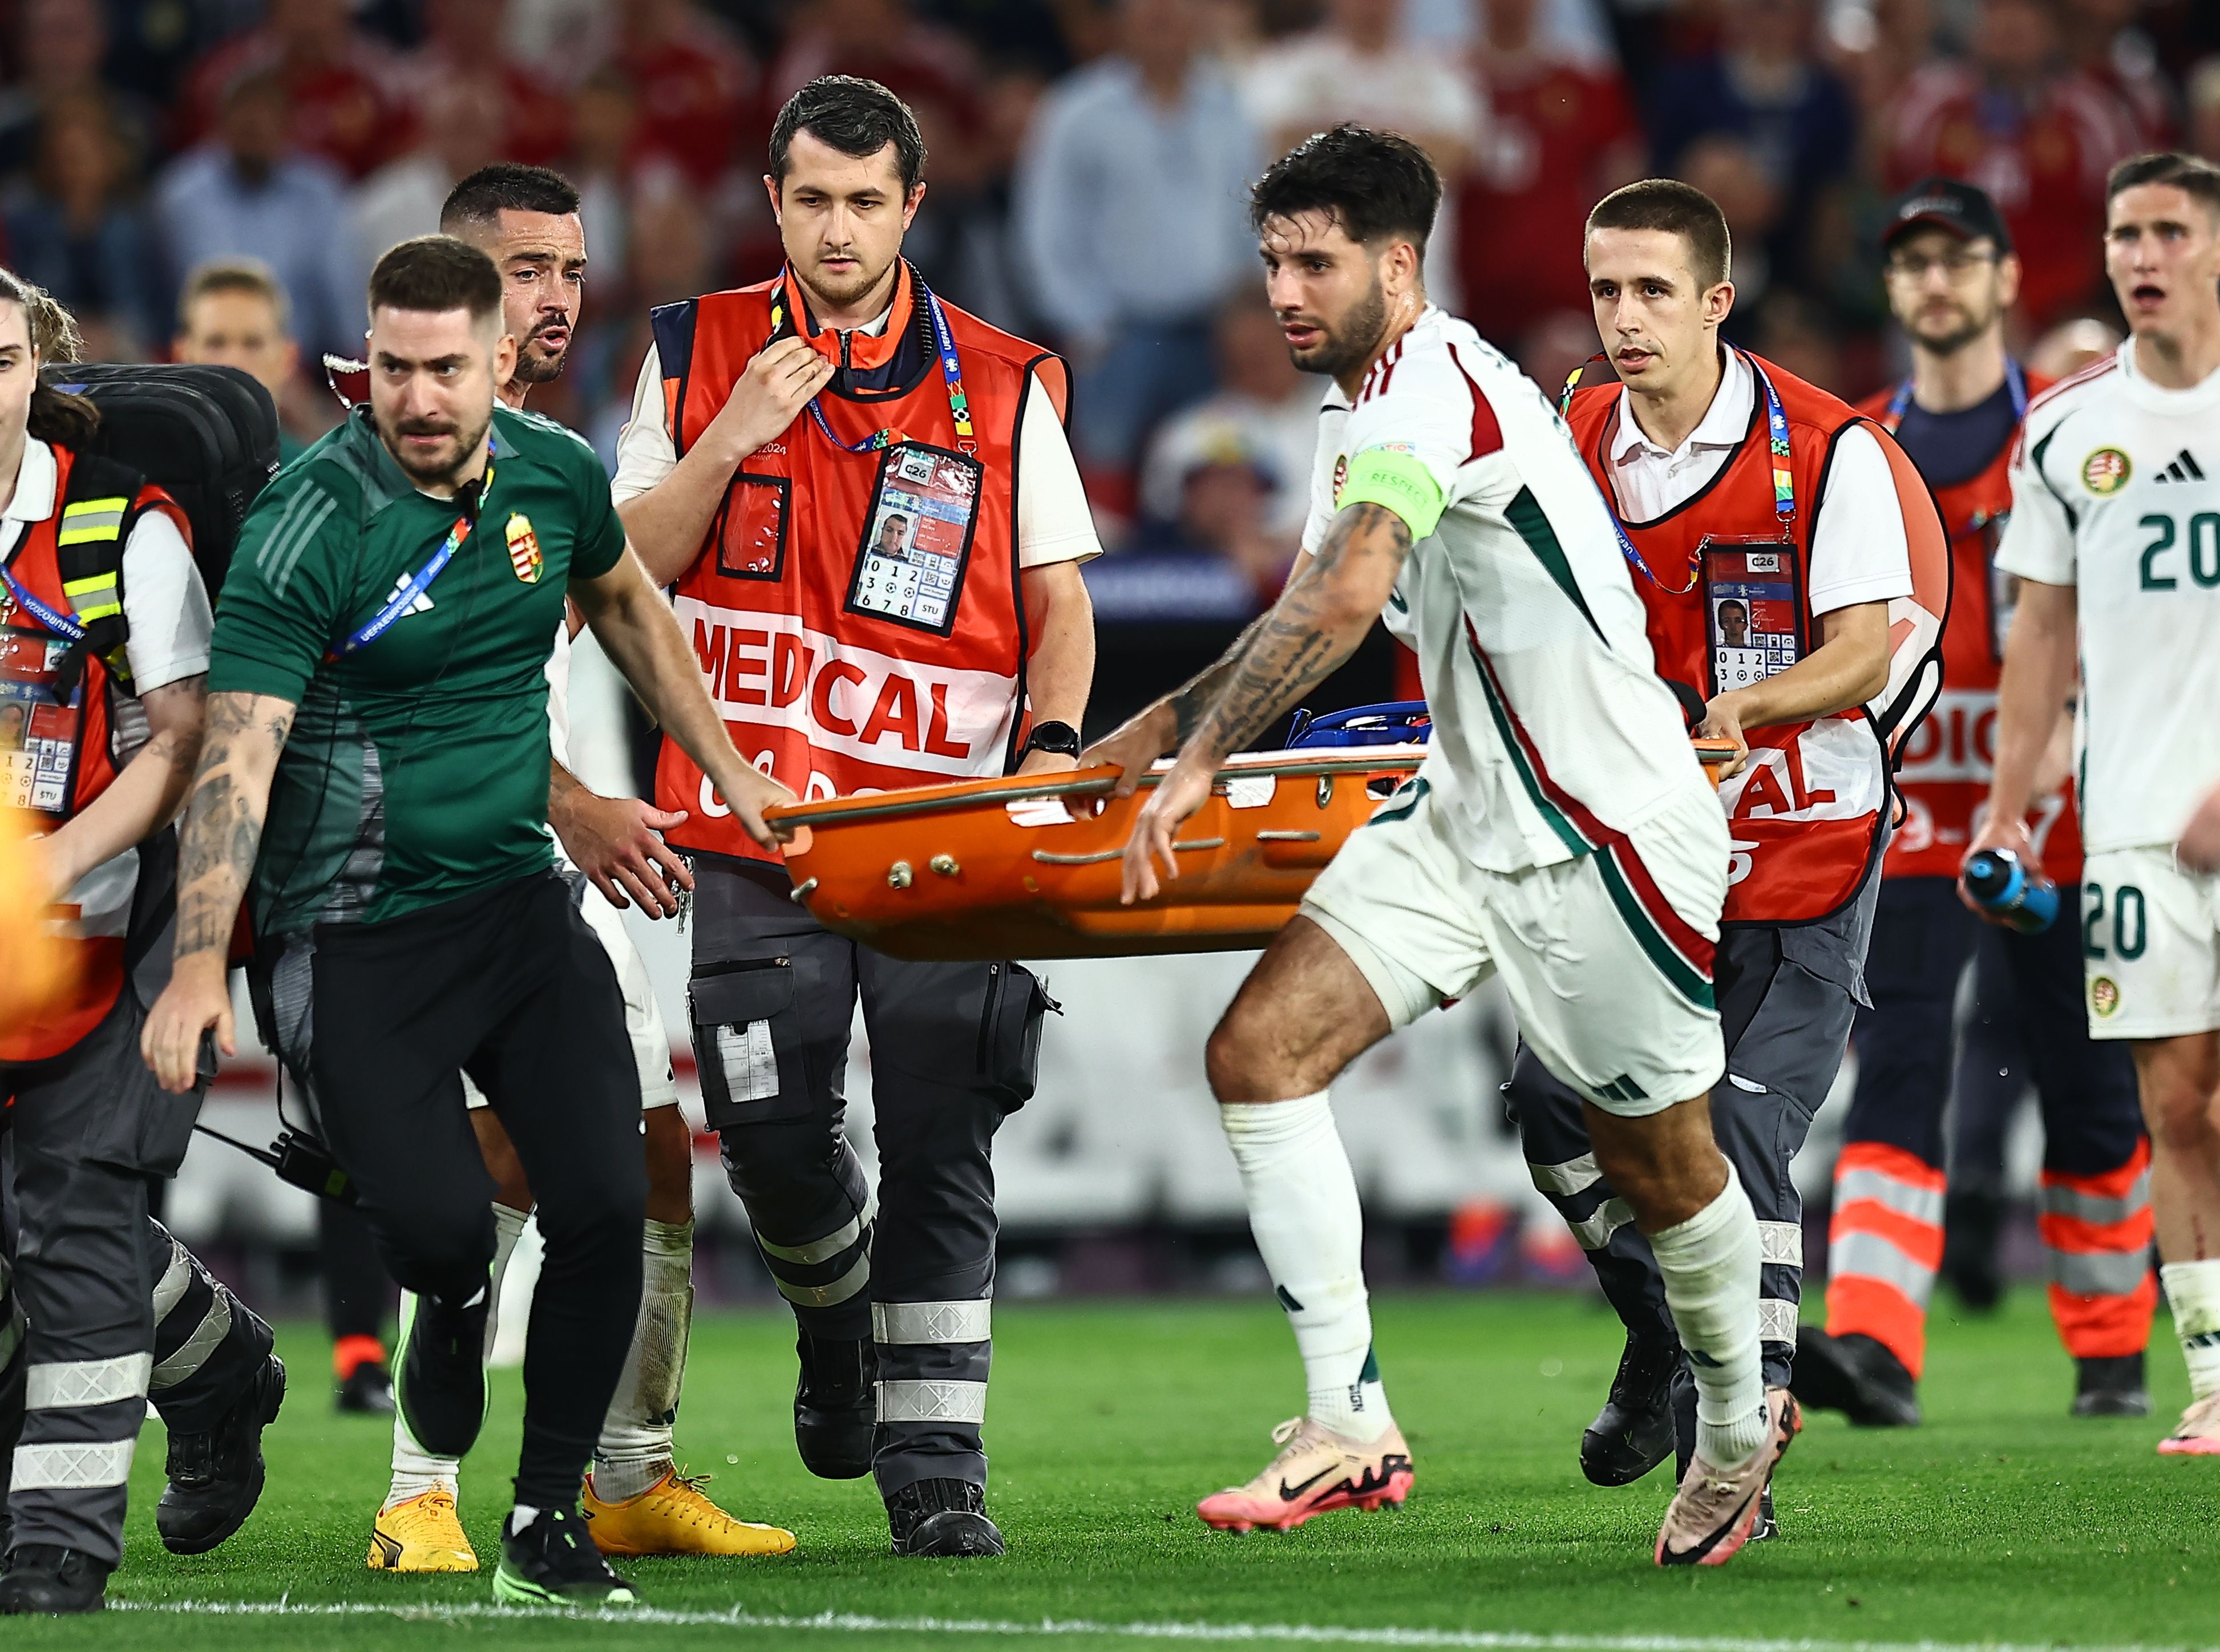 Hungary captain Dominik Szoboszlai helped carry the stretcher onto the pitch